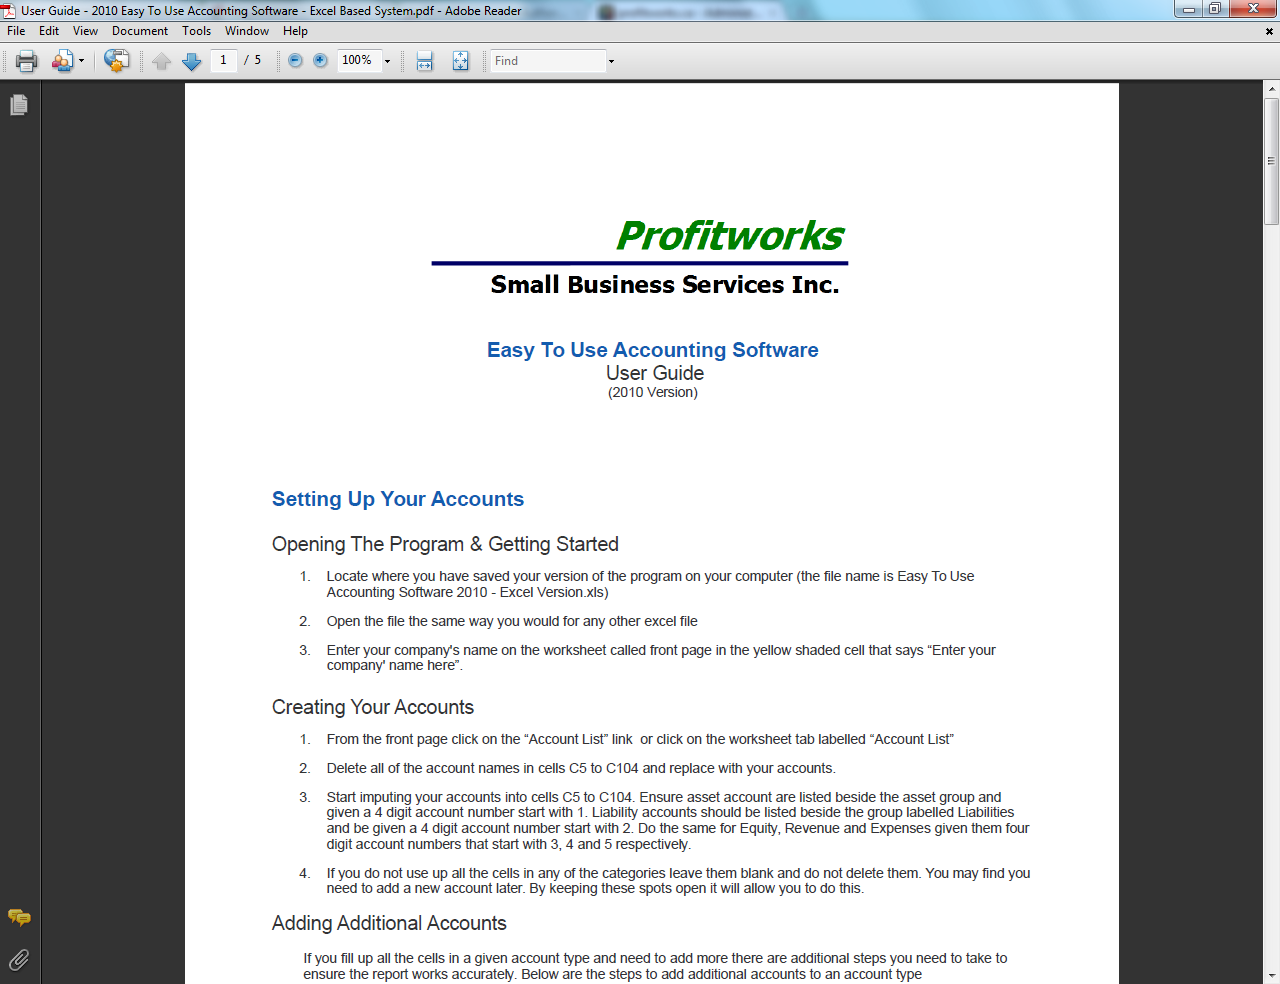 Easy To Use Accounting Software Manual